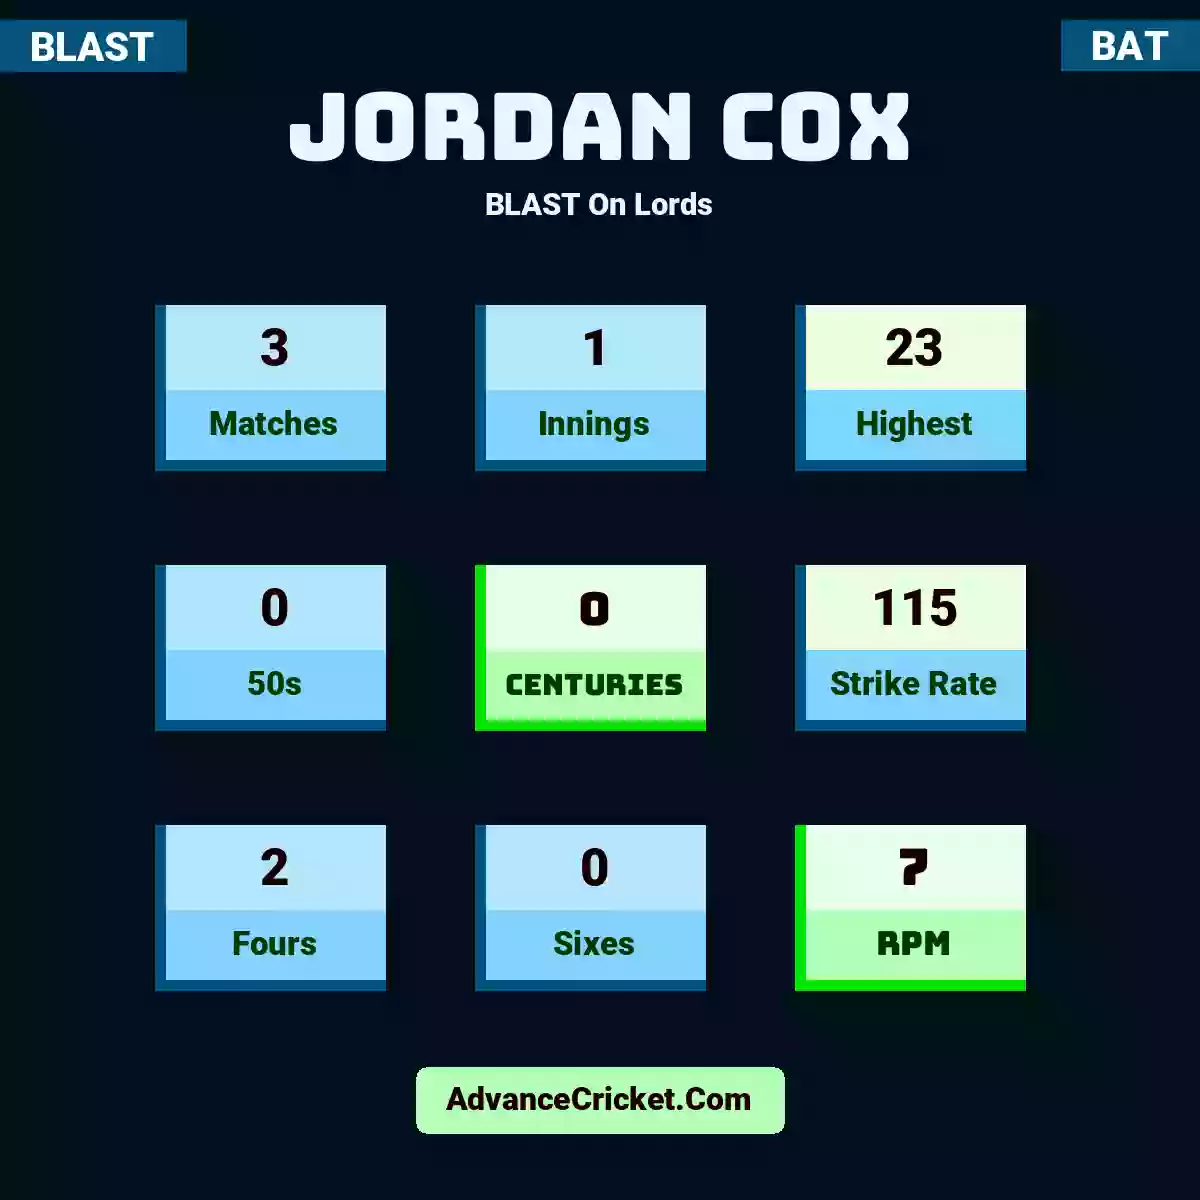 Jordan Cox BLAST  On Lords, Jordan Cox played 3 matches, scored 23 runs as highest, 0 half-centuries, and 0 centuries, with a strike rate of 115. J.Cox hit 2 fours and 0 sixes, with an RPM of 7.